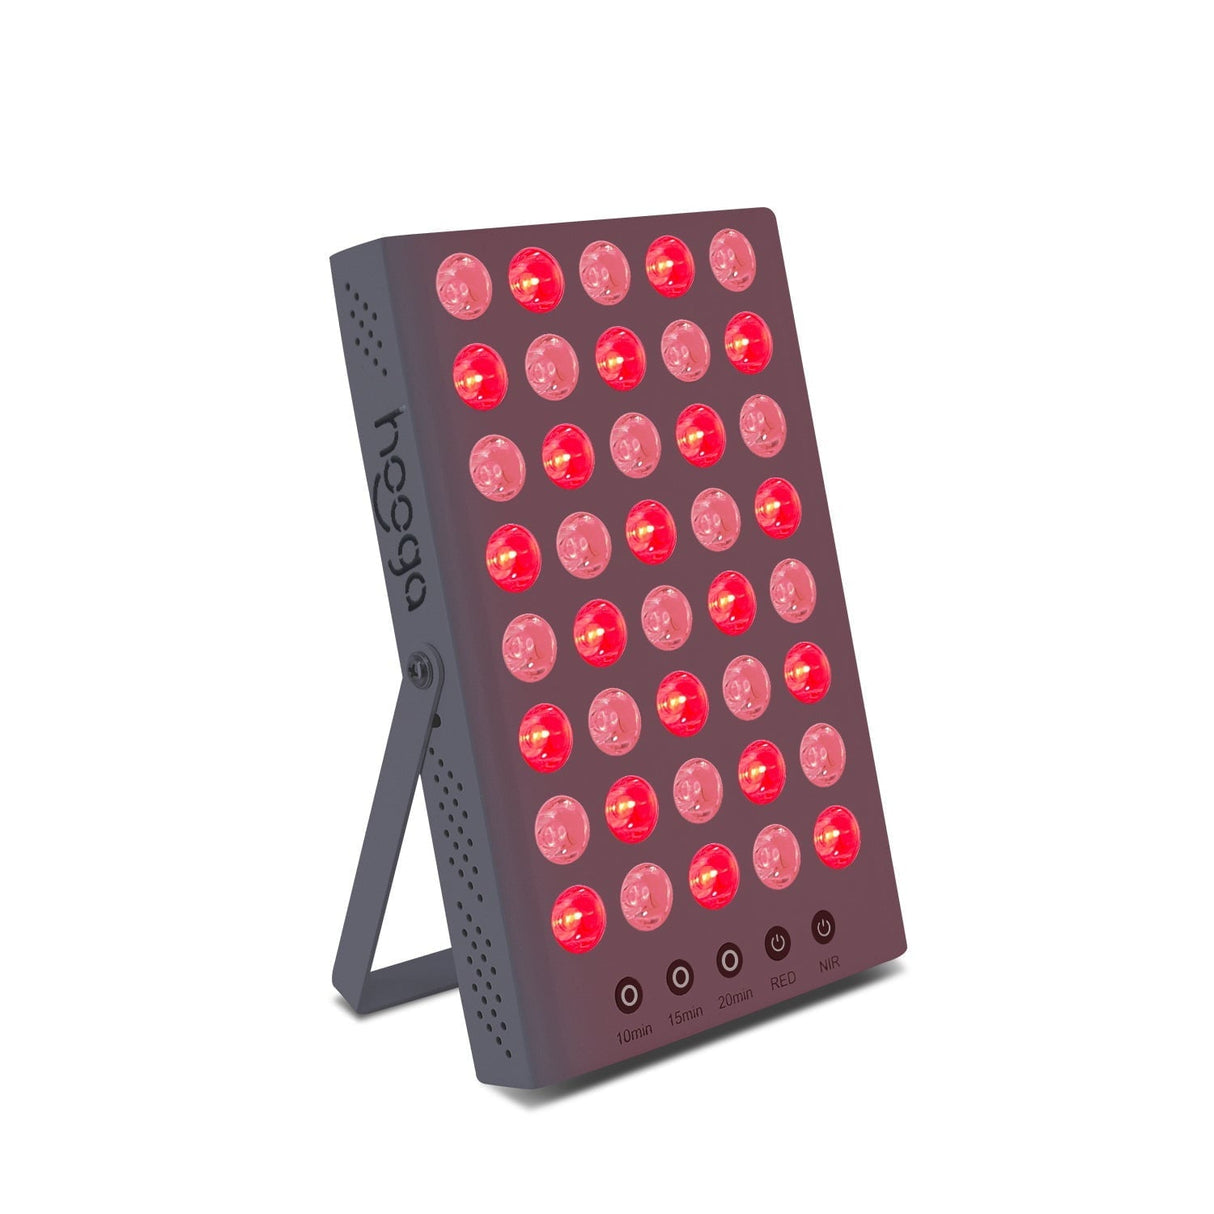 Hooga | HG200 Red Light Therapy Device